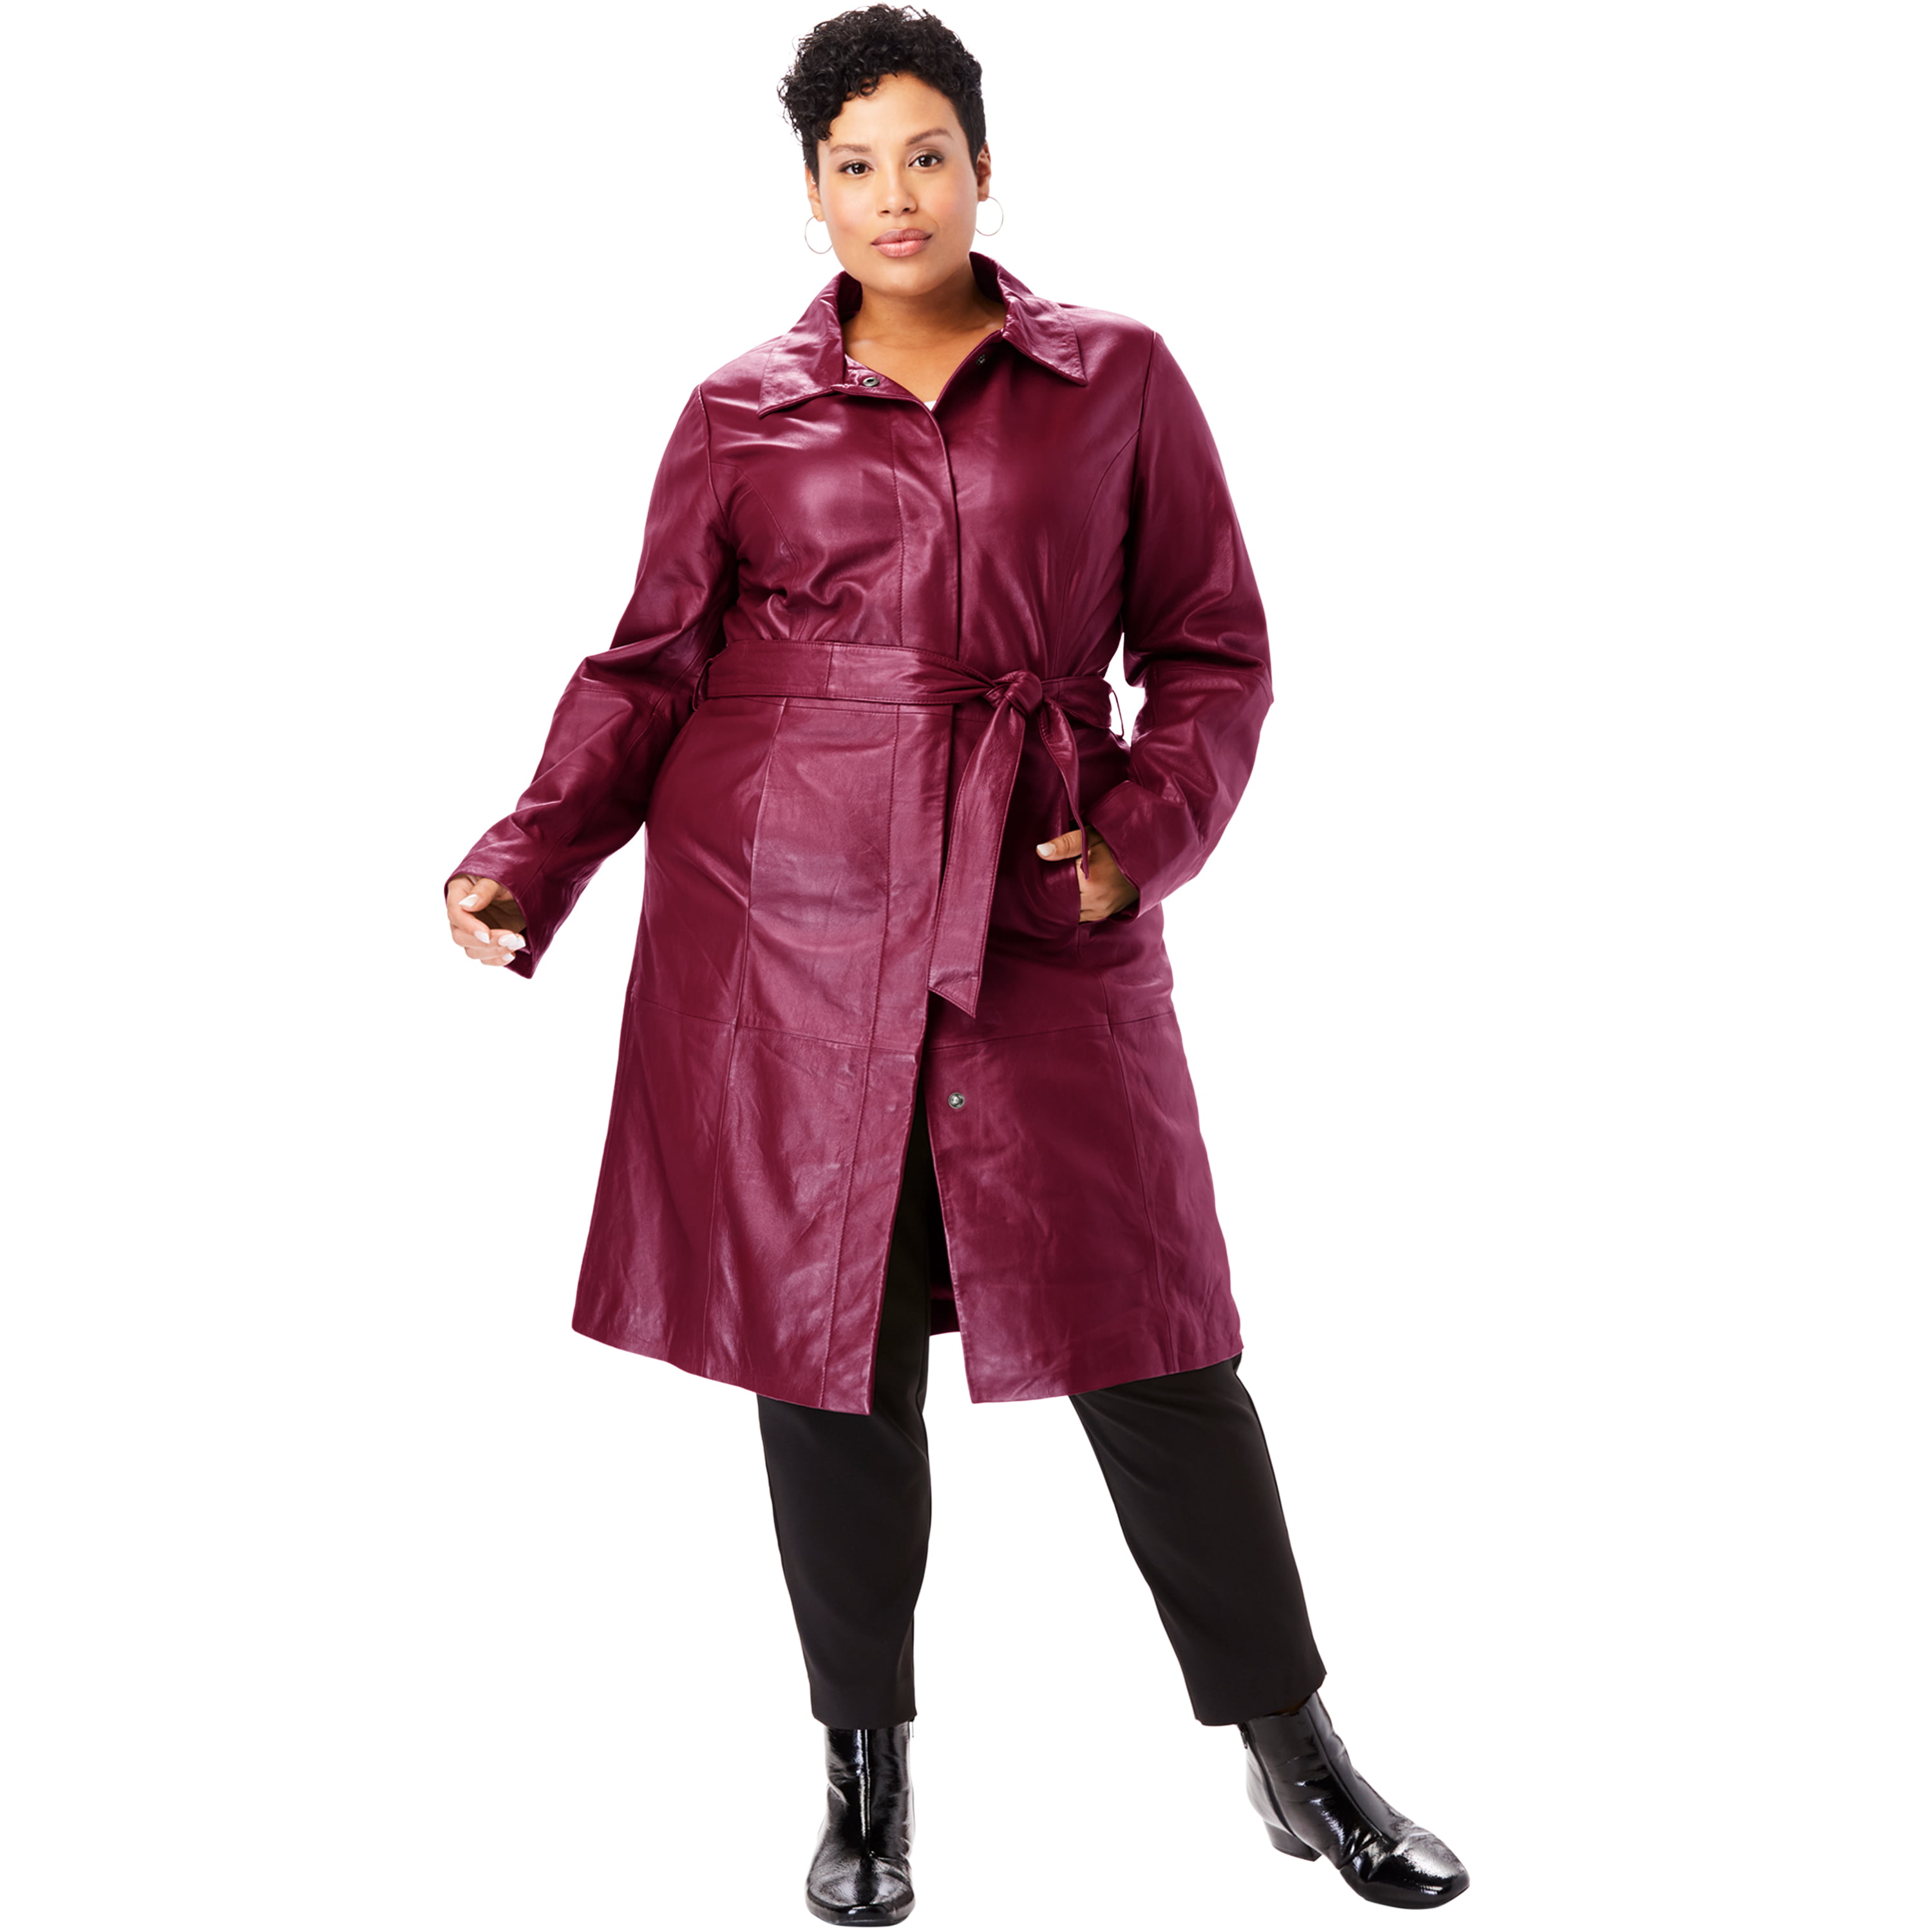 Leather Trench Coat for Women #L506LP